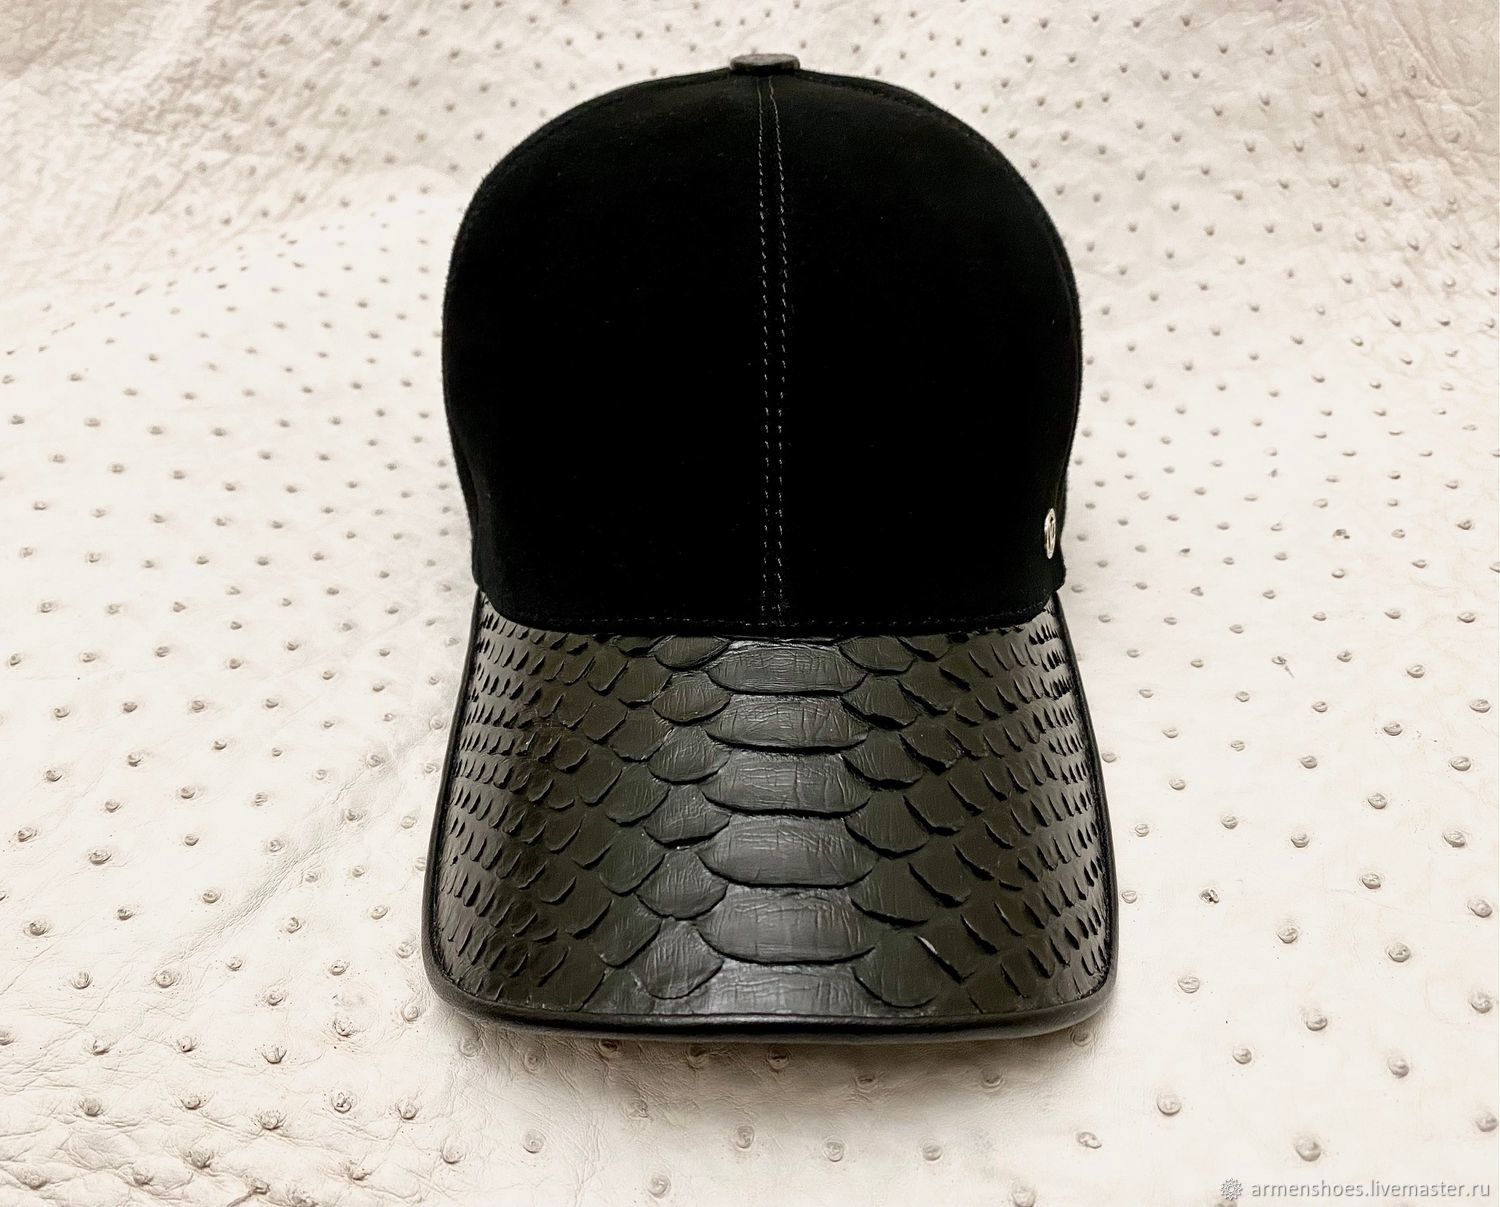 Baseball cap made of genuine python leather and genuine suede!, Baseball caps, St. Petersburg,  Фото №1